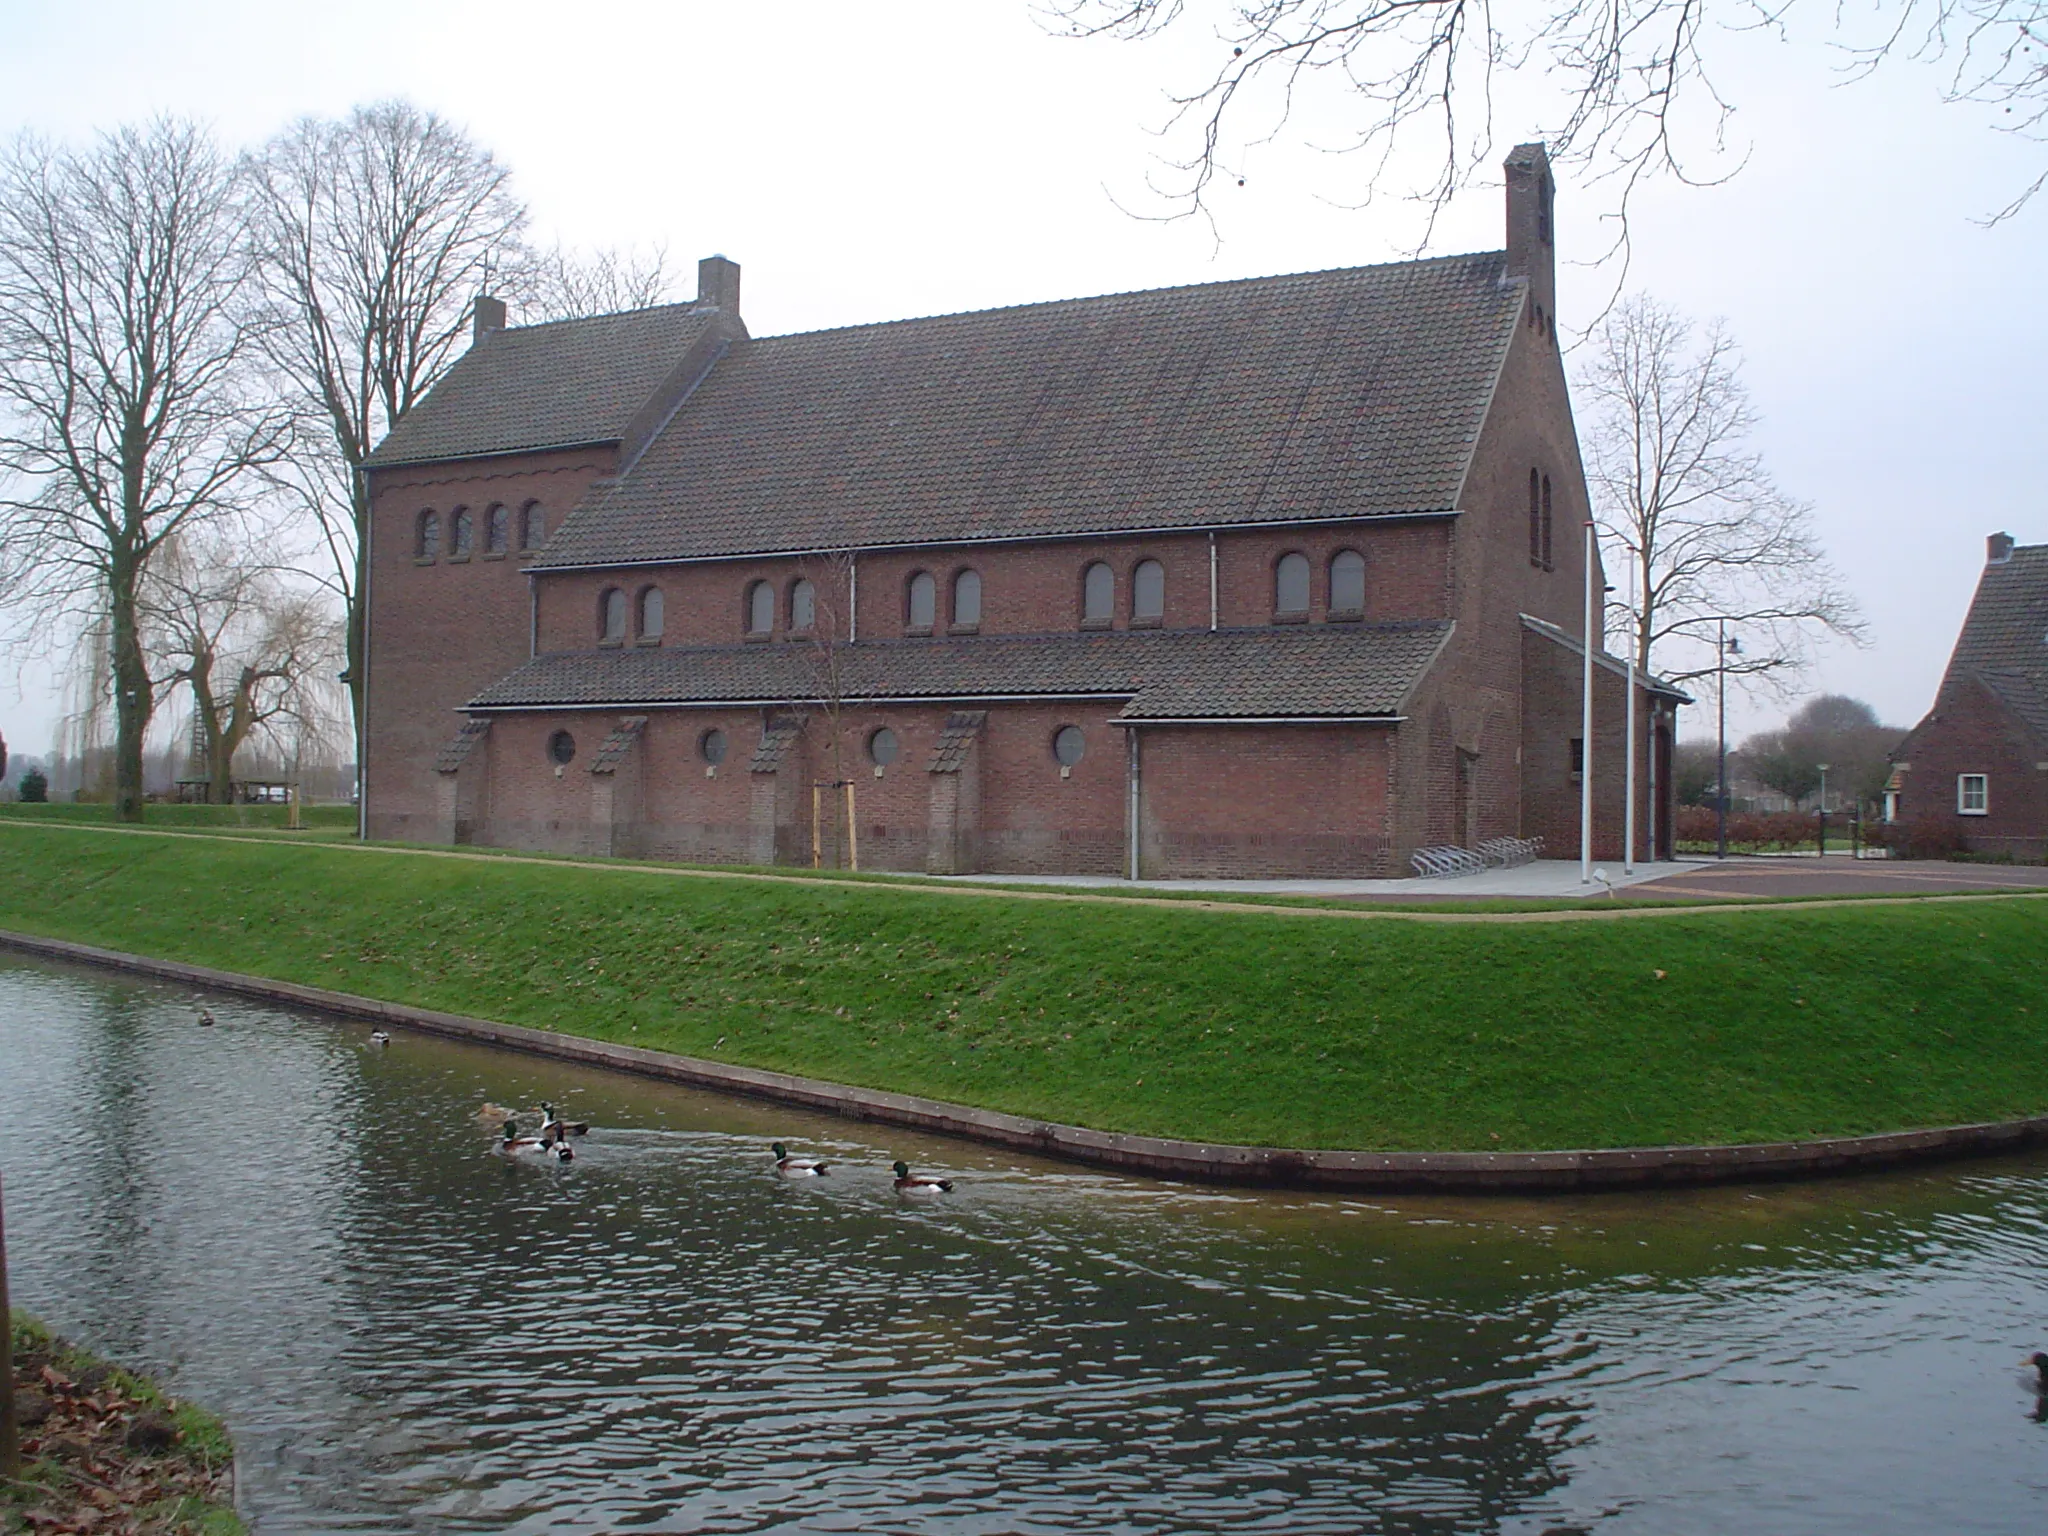 Photo showing: The Saint Hiëronymus and Antoniuschurch in the village Laar, near Weert, the Netherlands.